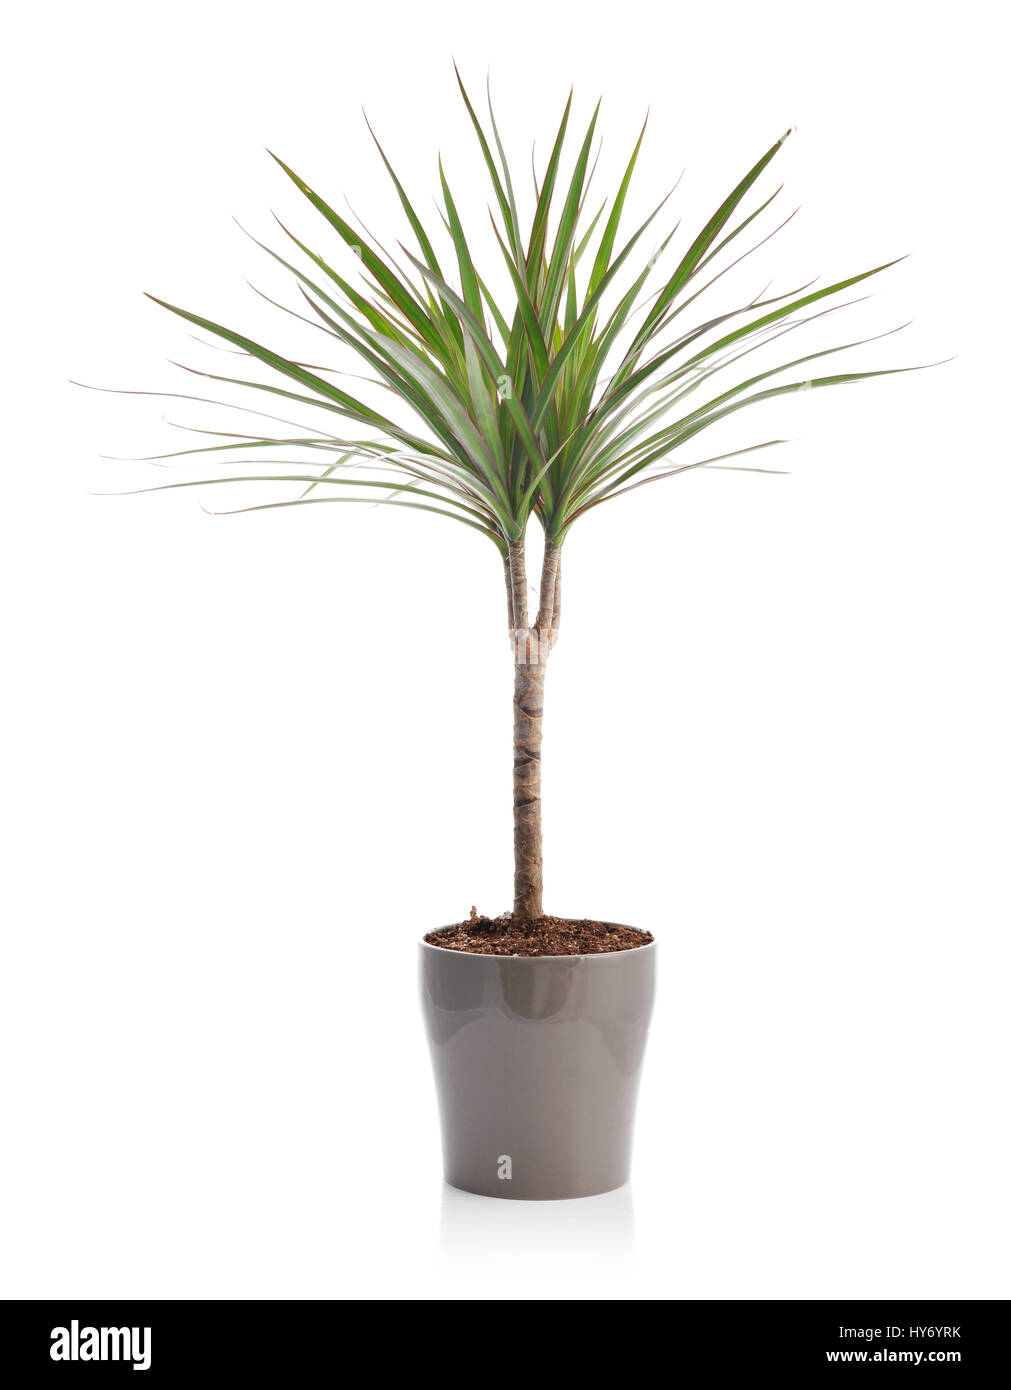 Dracaena in a flower pot the isolated on white background Stock Photo